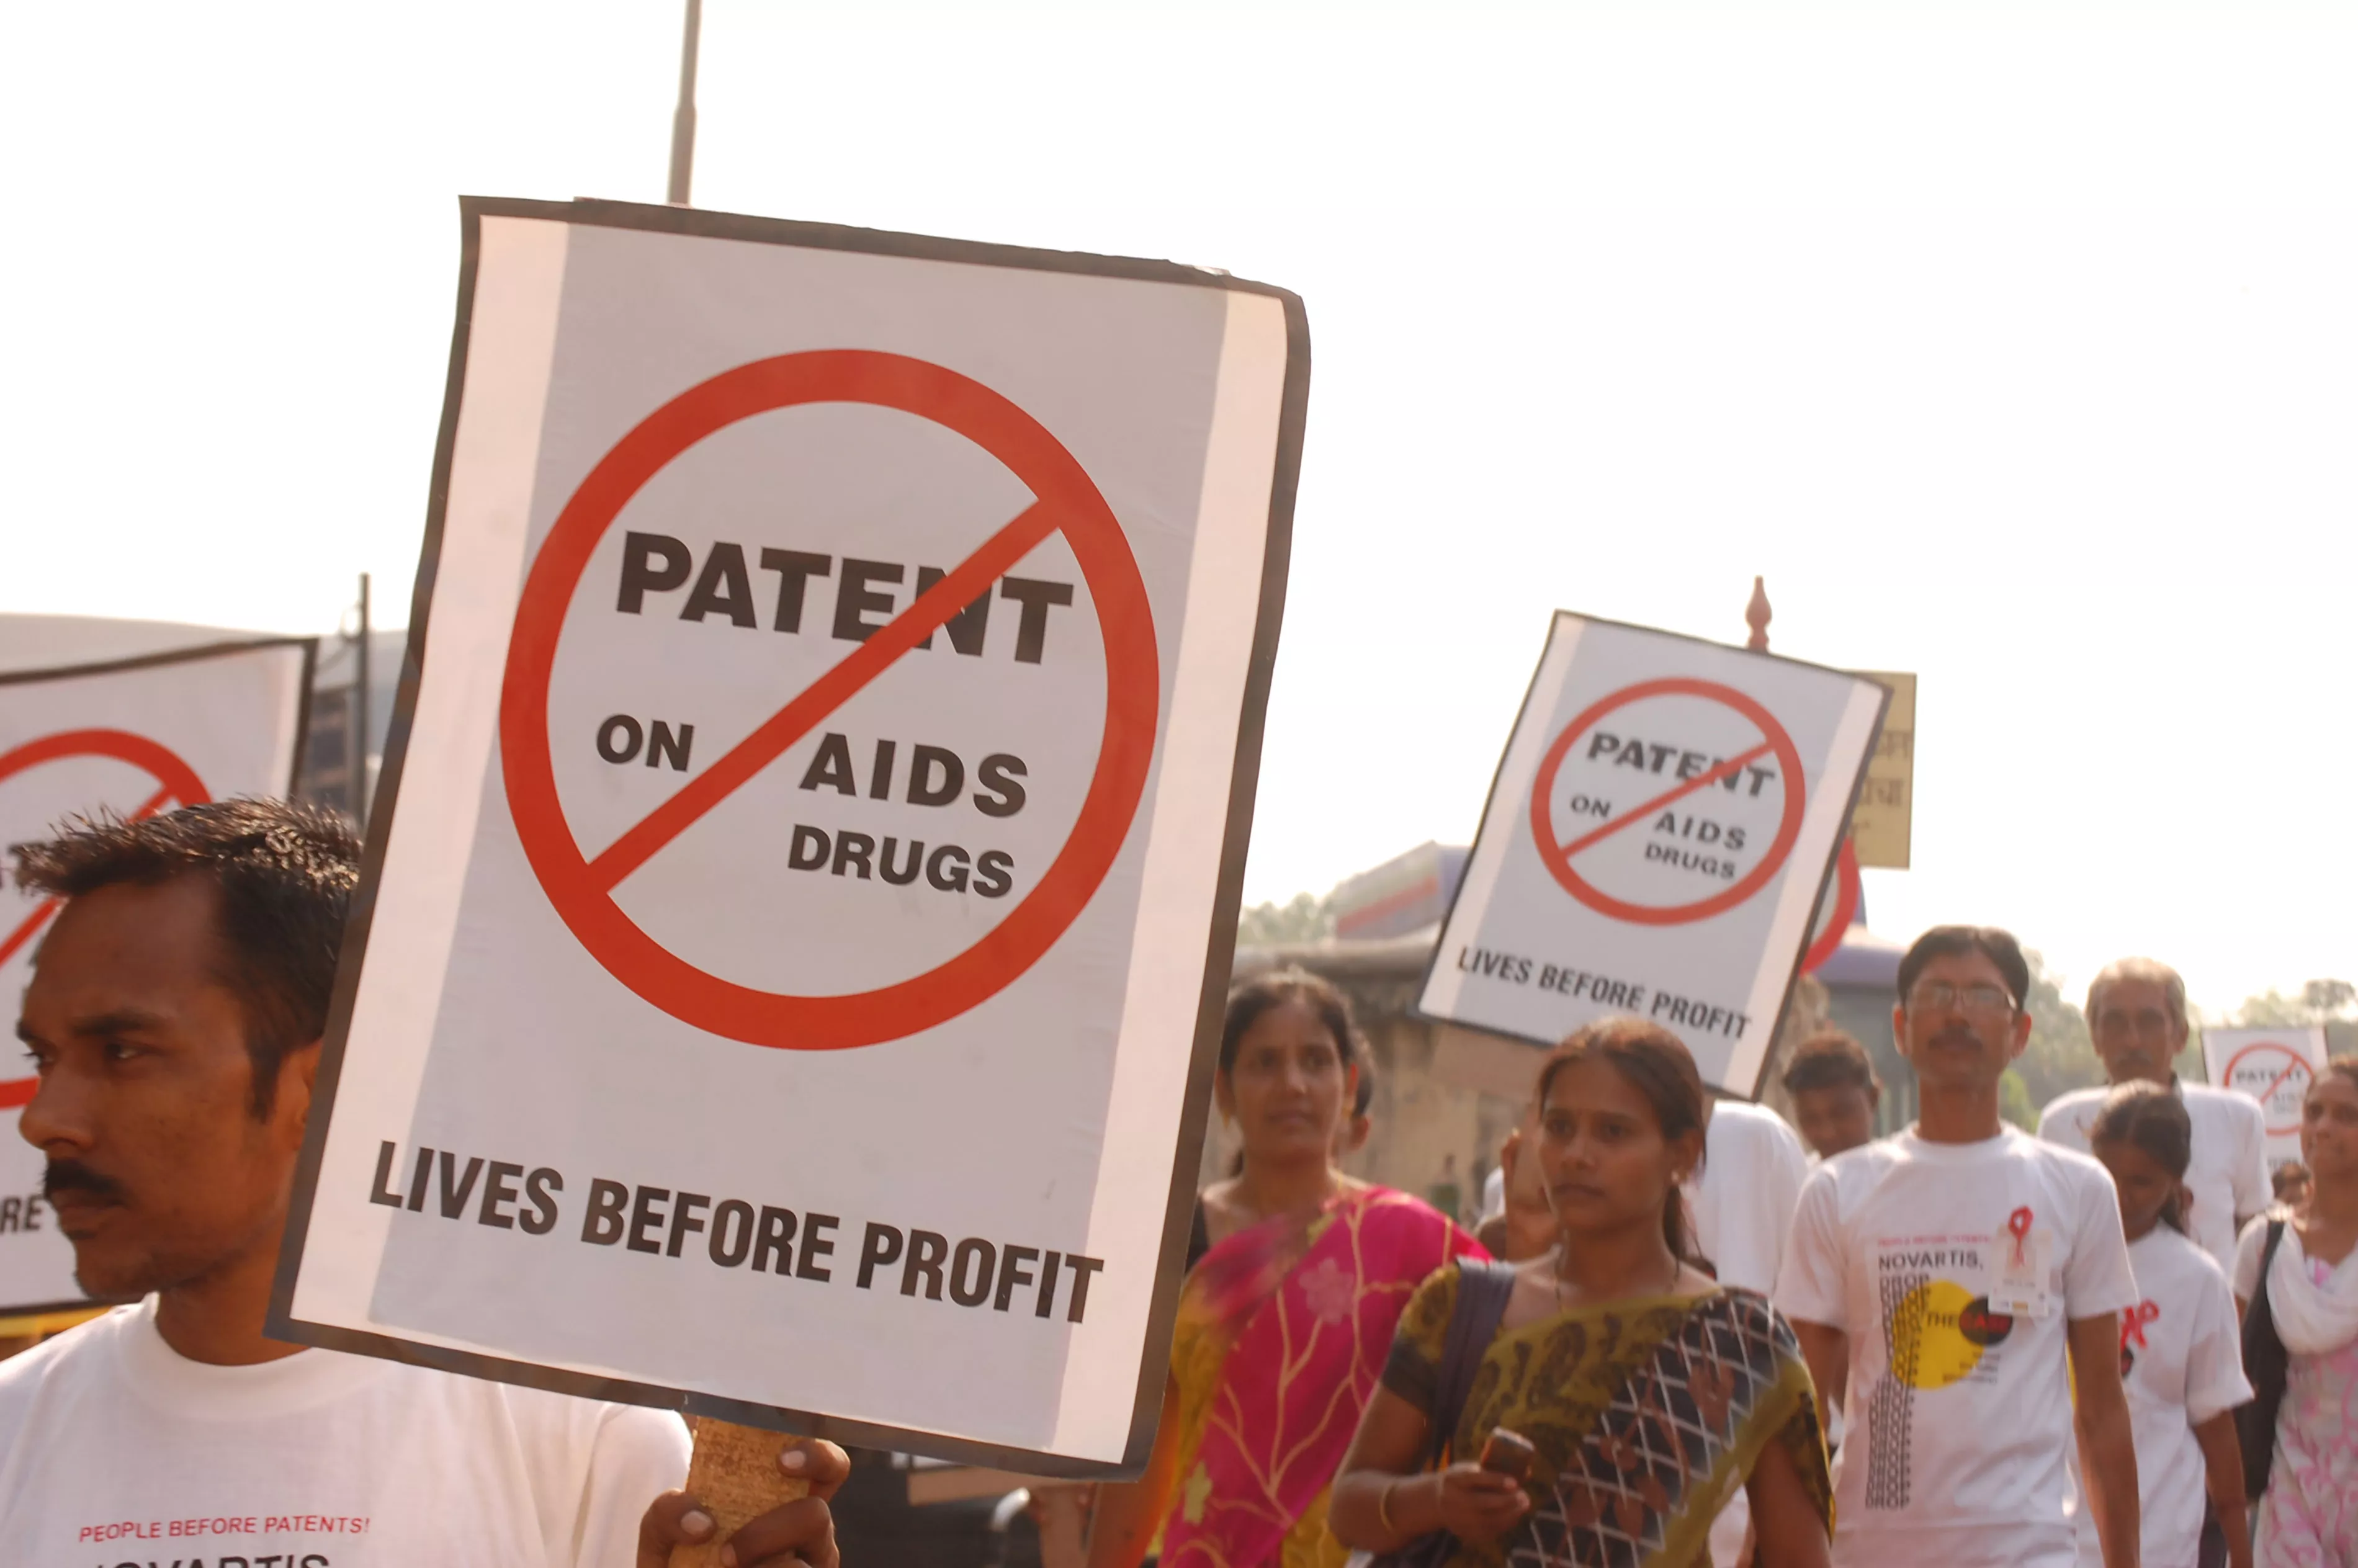 A protest was organised by Indian civil society on World AIDS Day, 1 December 2011, in front of Novartis' Mumbai Office.